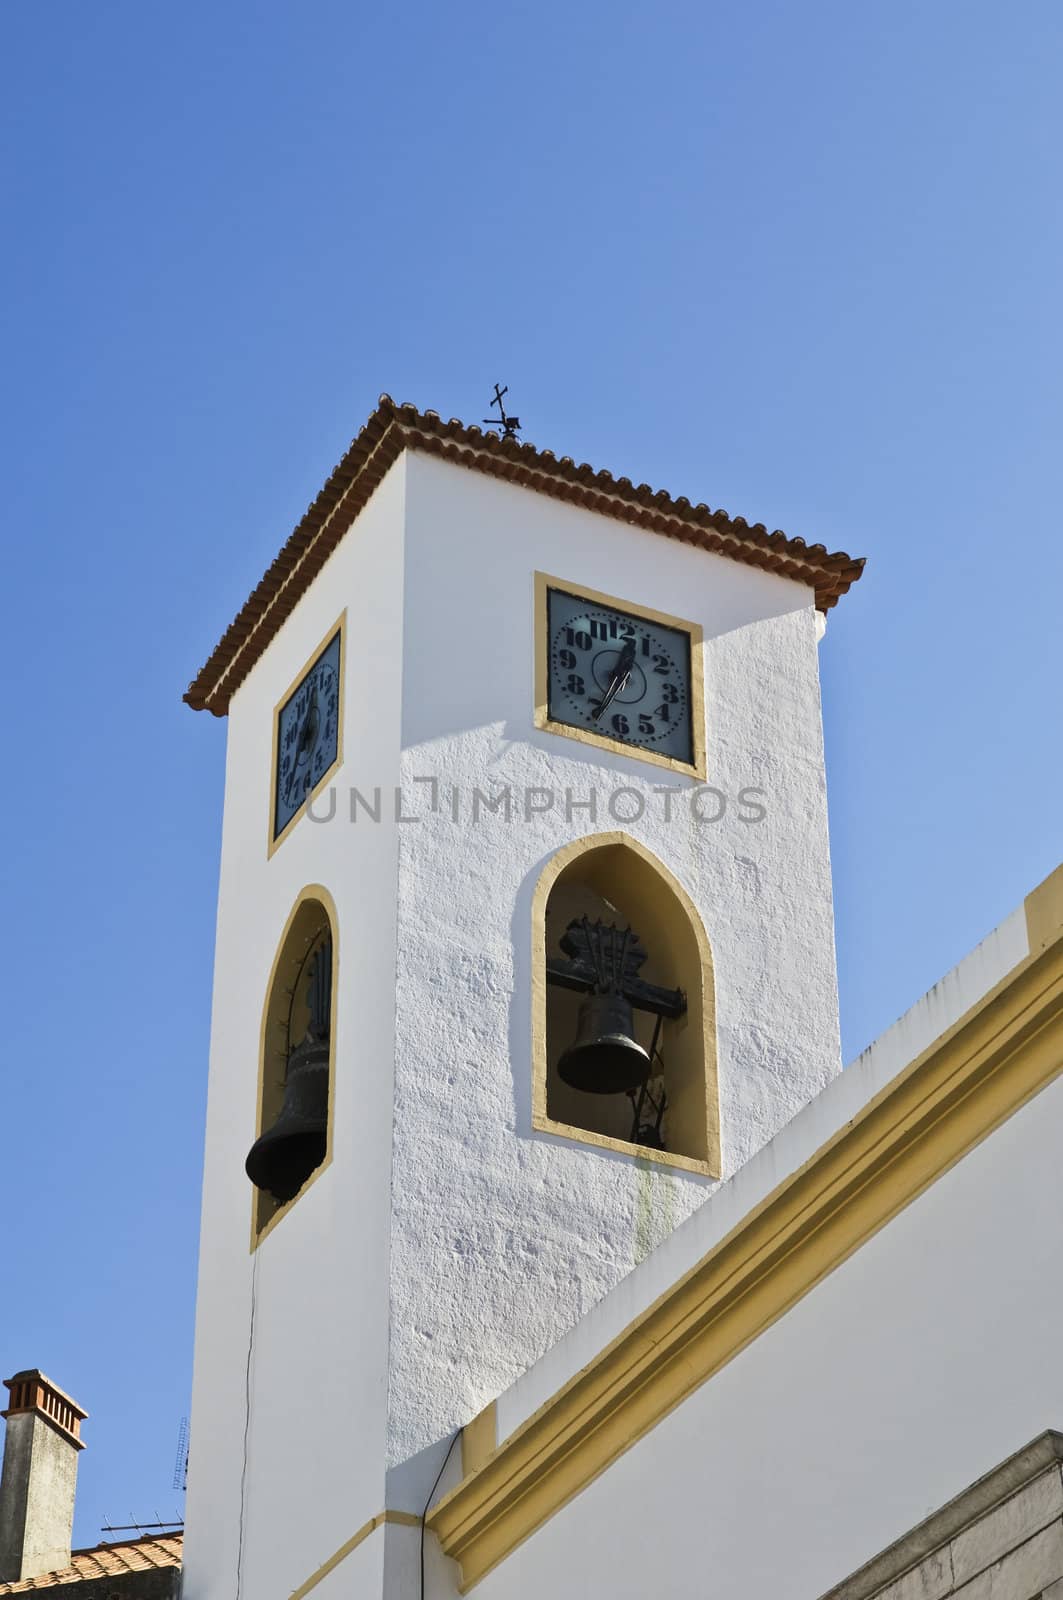 Traditional portuguese clock and bell tower in clear sky
